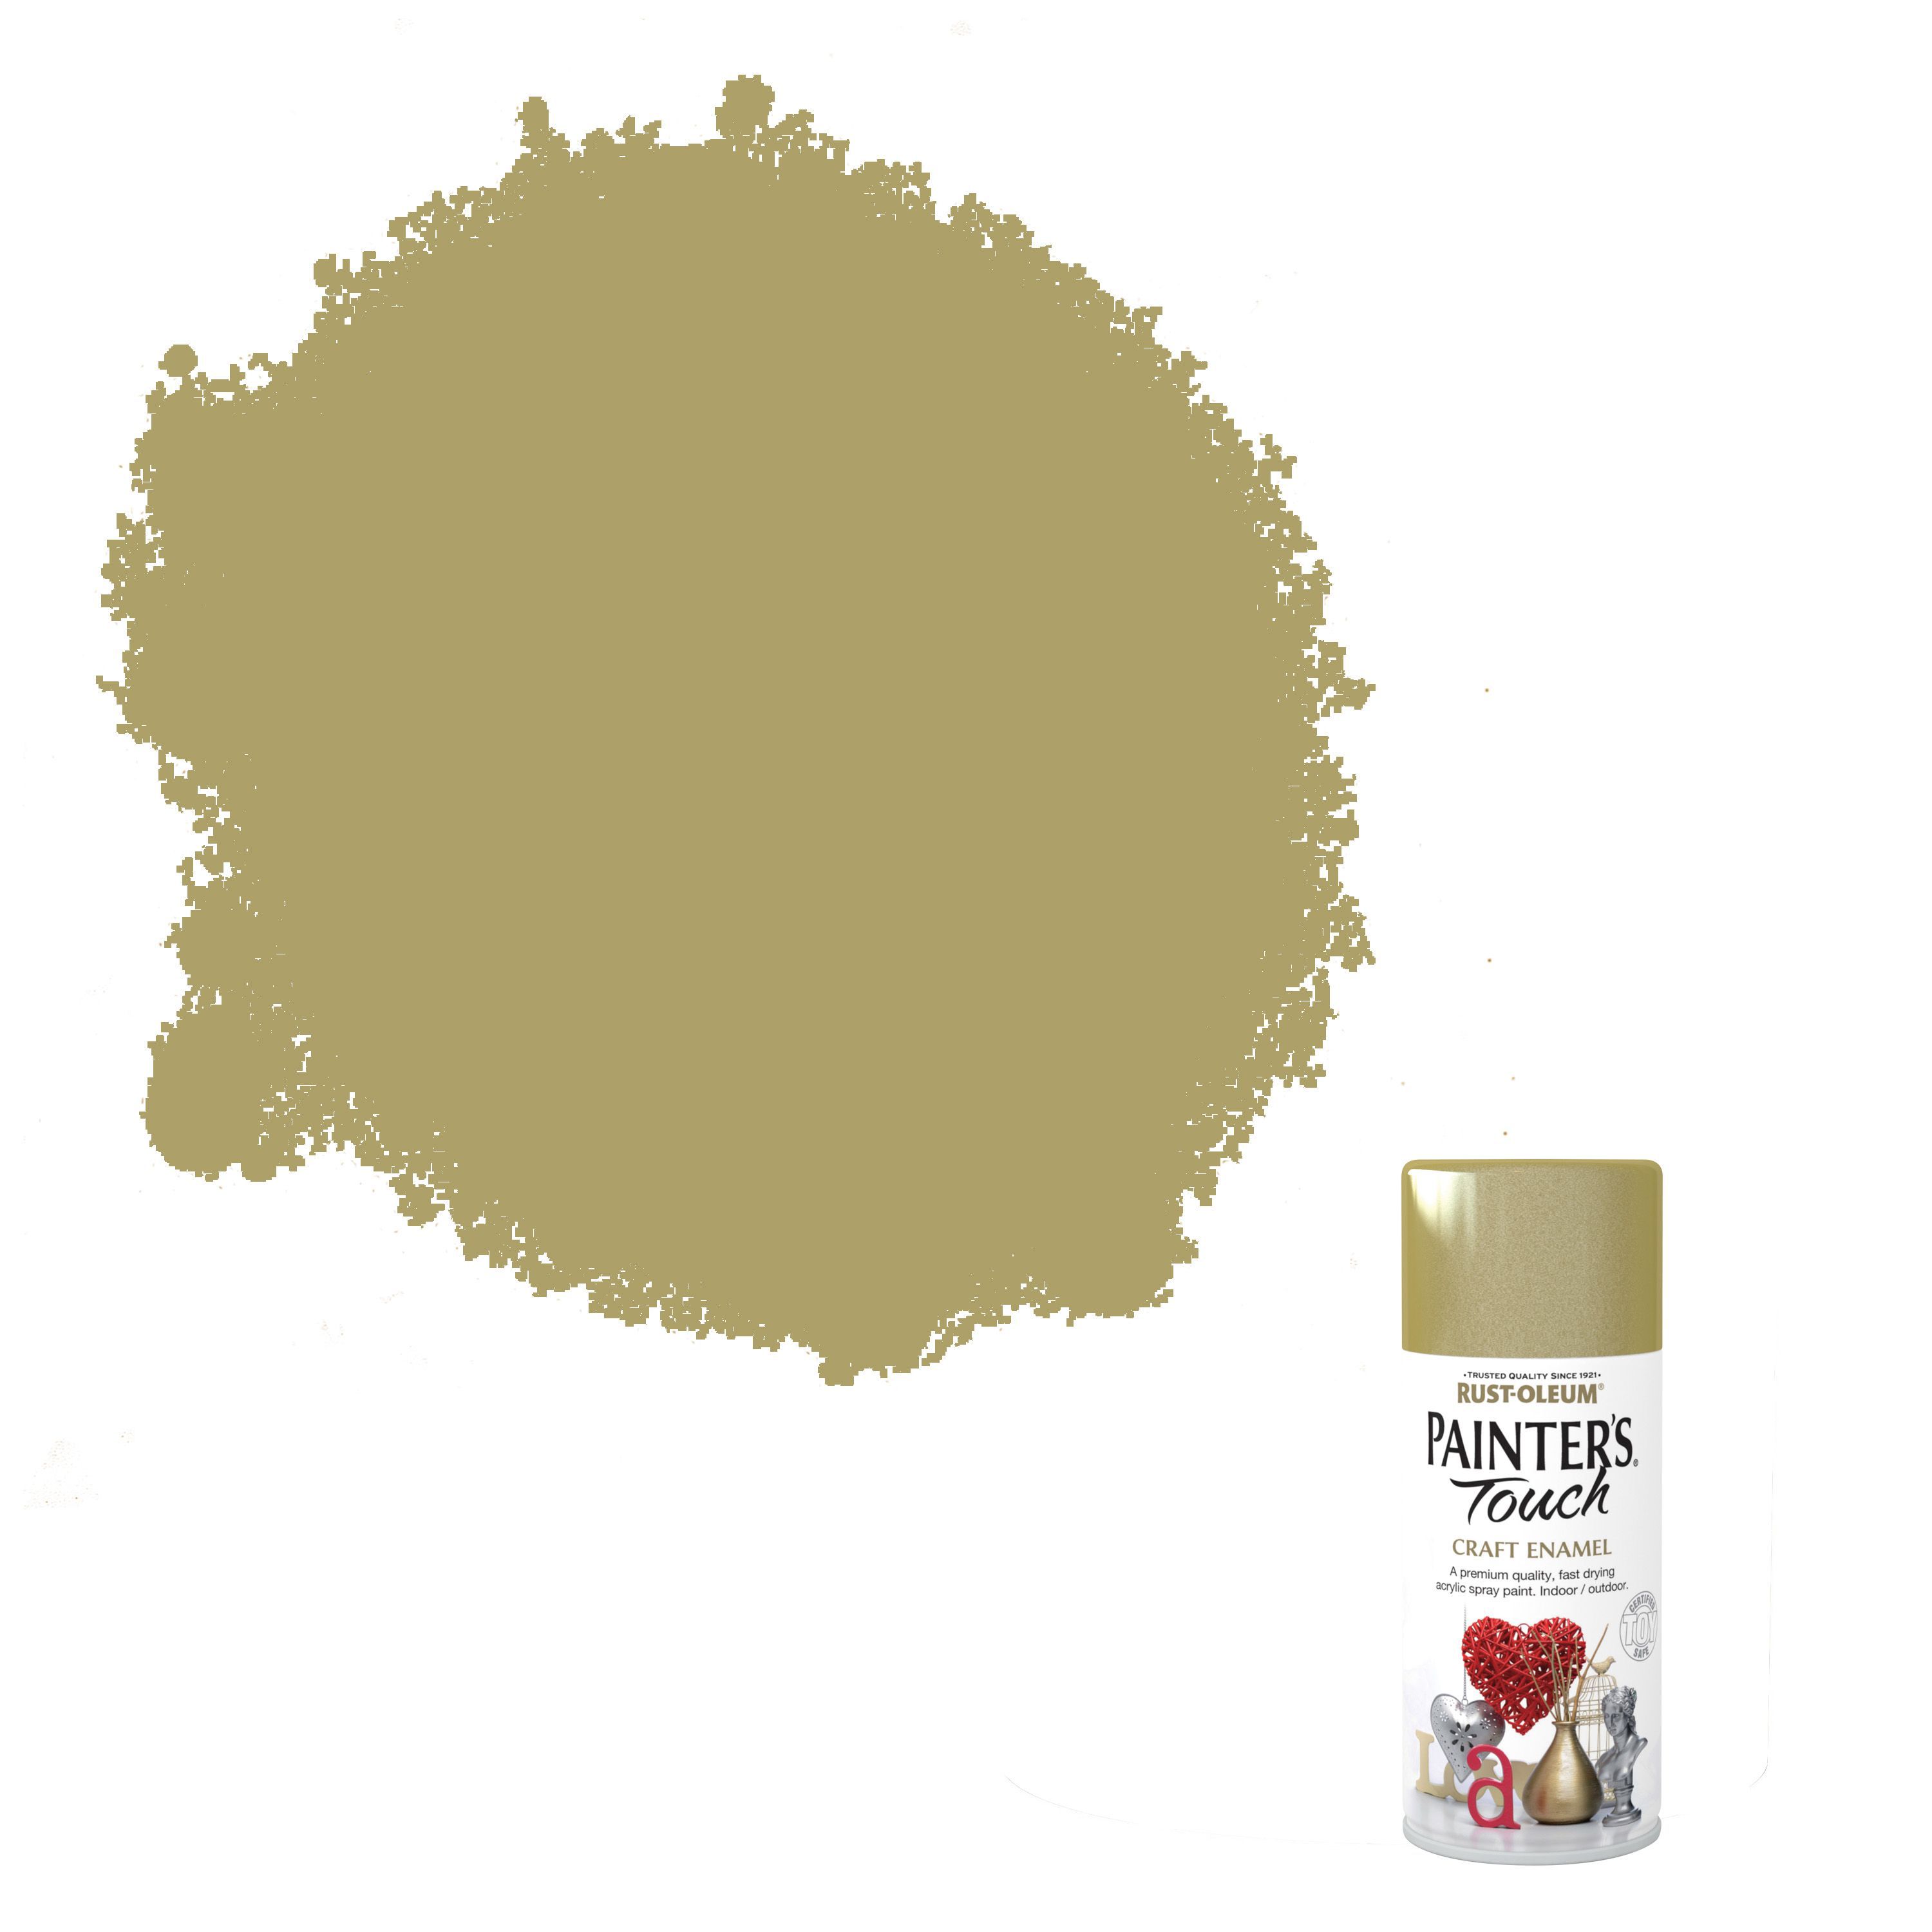 Shabby Chic Chalk Based Furniture Paint 2.5 Litre Antique Gold